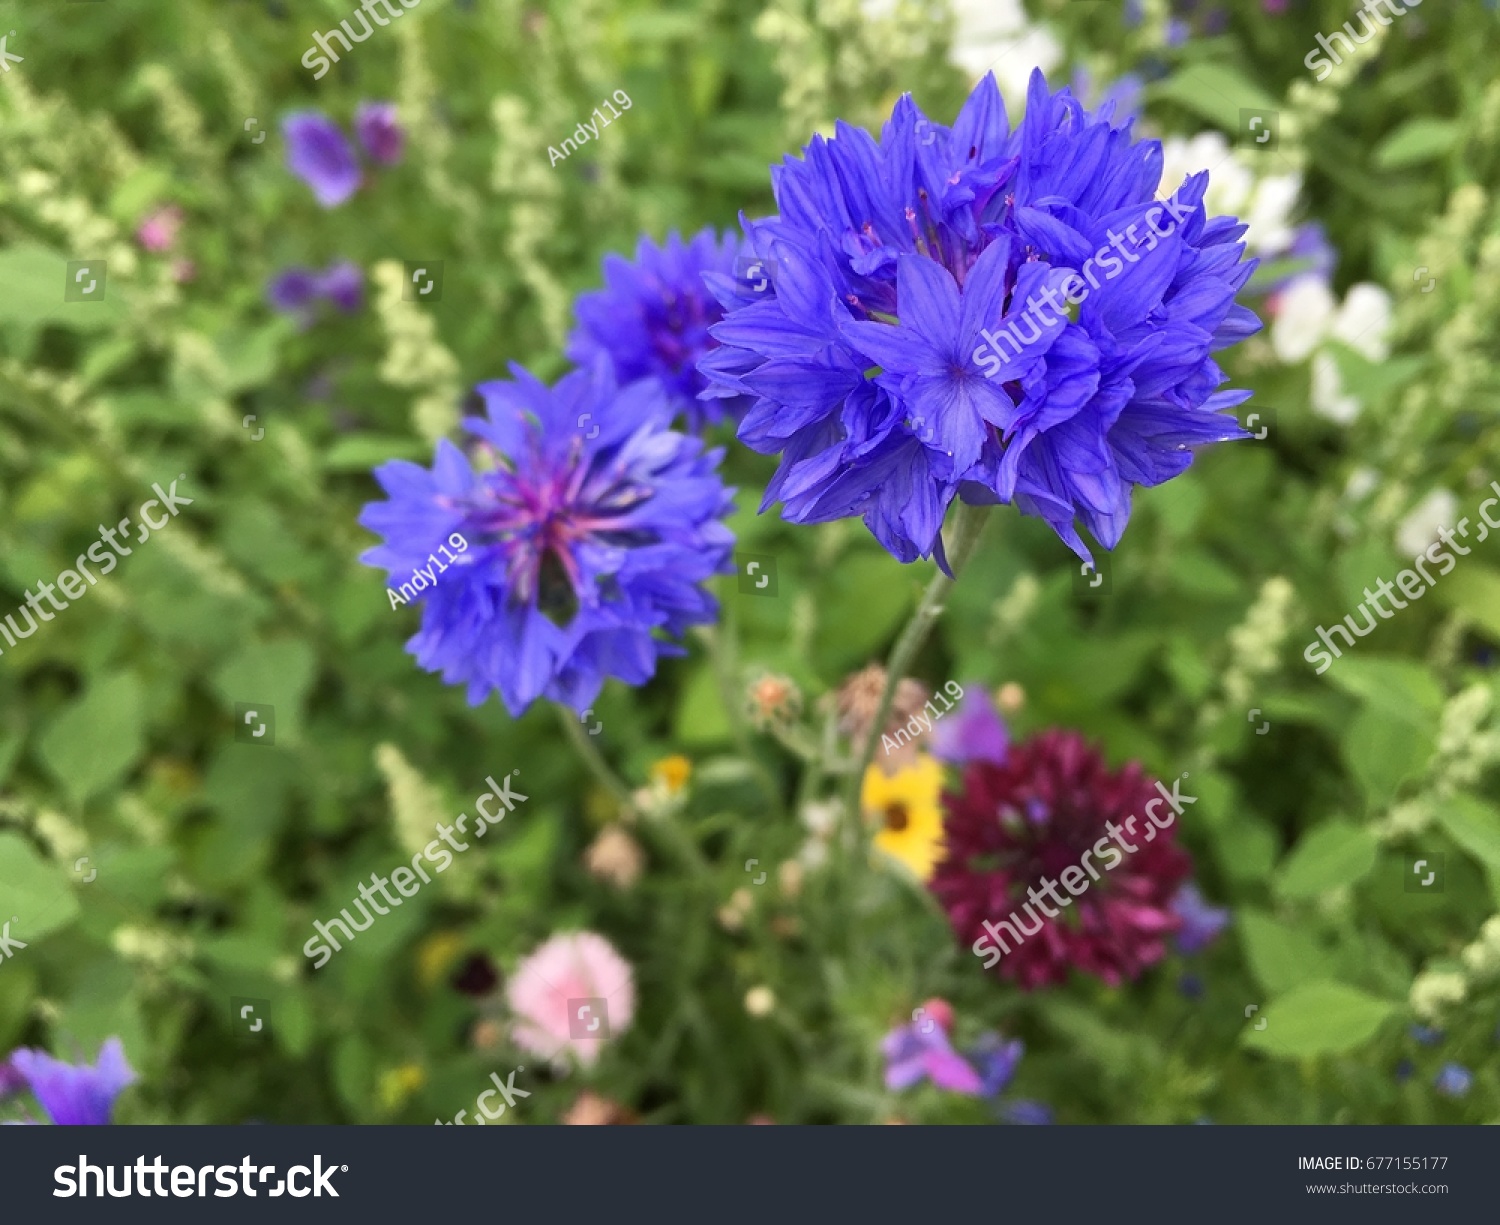 British mixed wild flowers featuring large blue petals #677155177